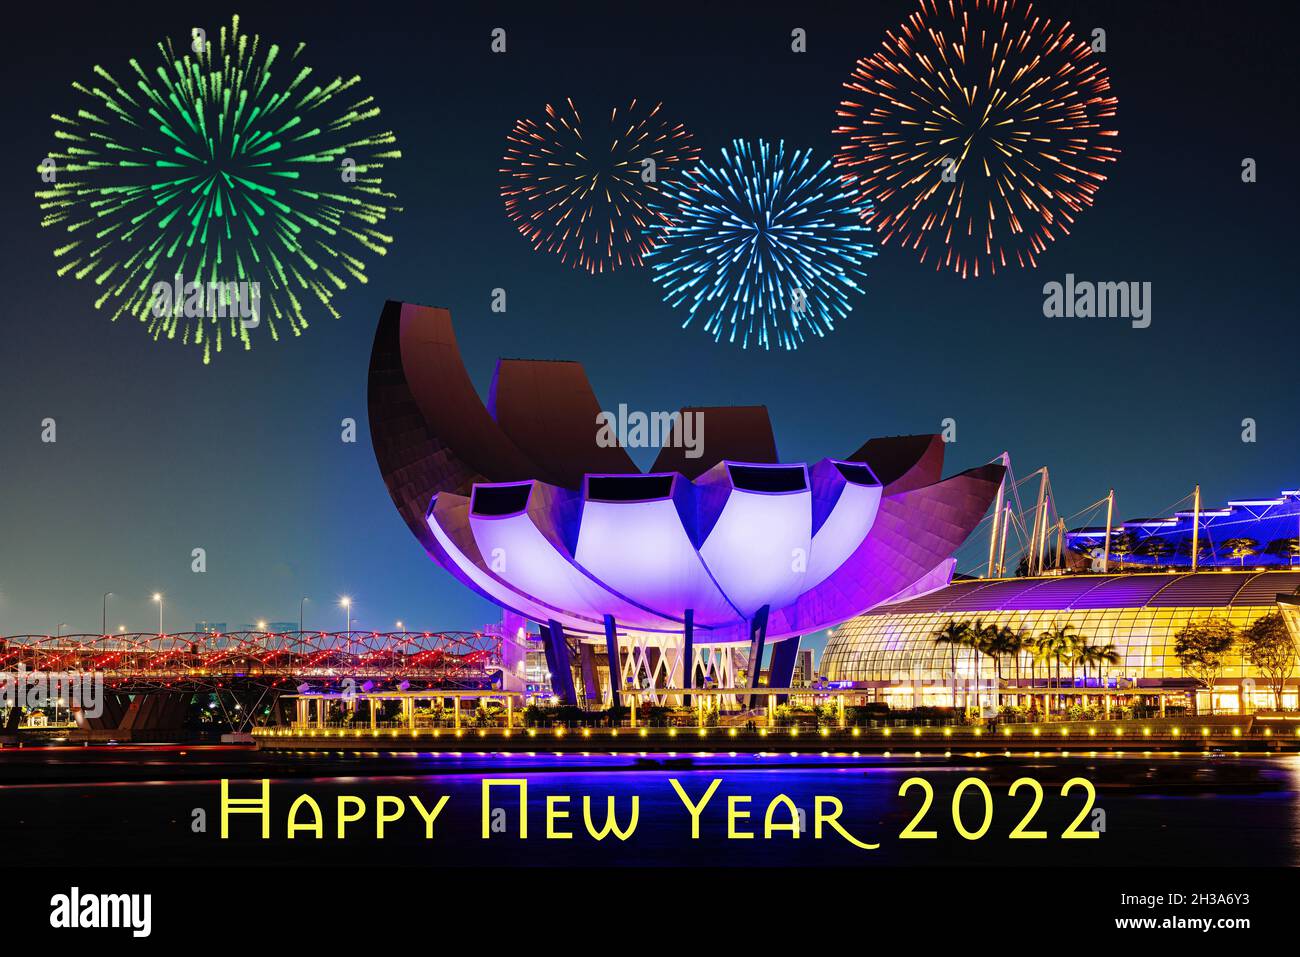 the fireworks during New Year's eve 2022 in Singapore Stock Photo